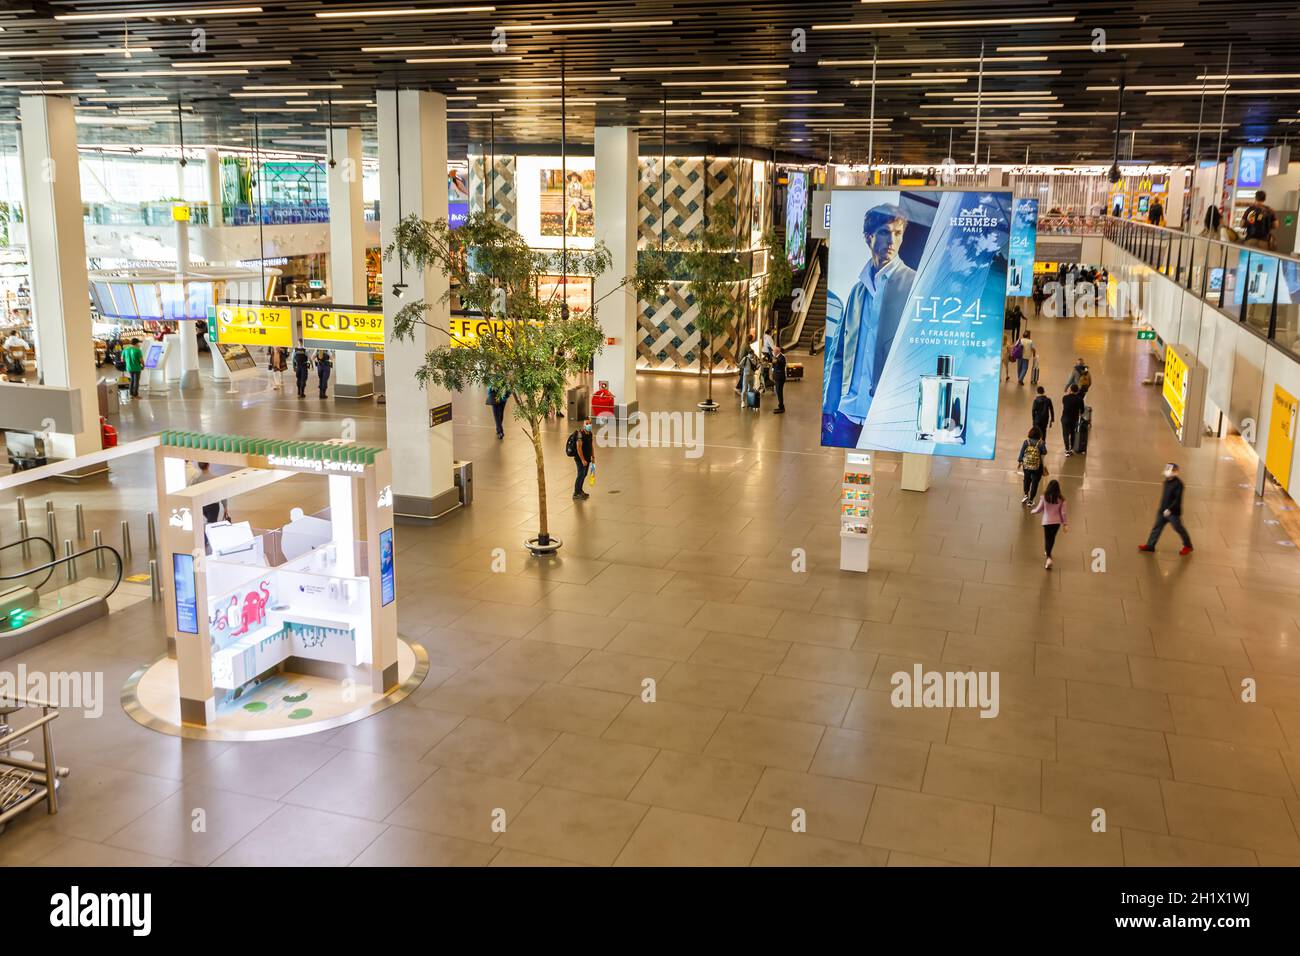 Amsterdam, Netherlands - May 29, 2021: Terminal building of Amsterdam Schiphol airport (AMS) in the Netherlands. Stock Photo